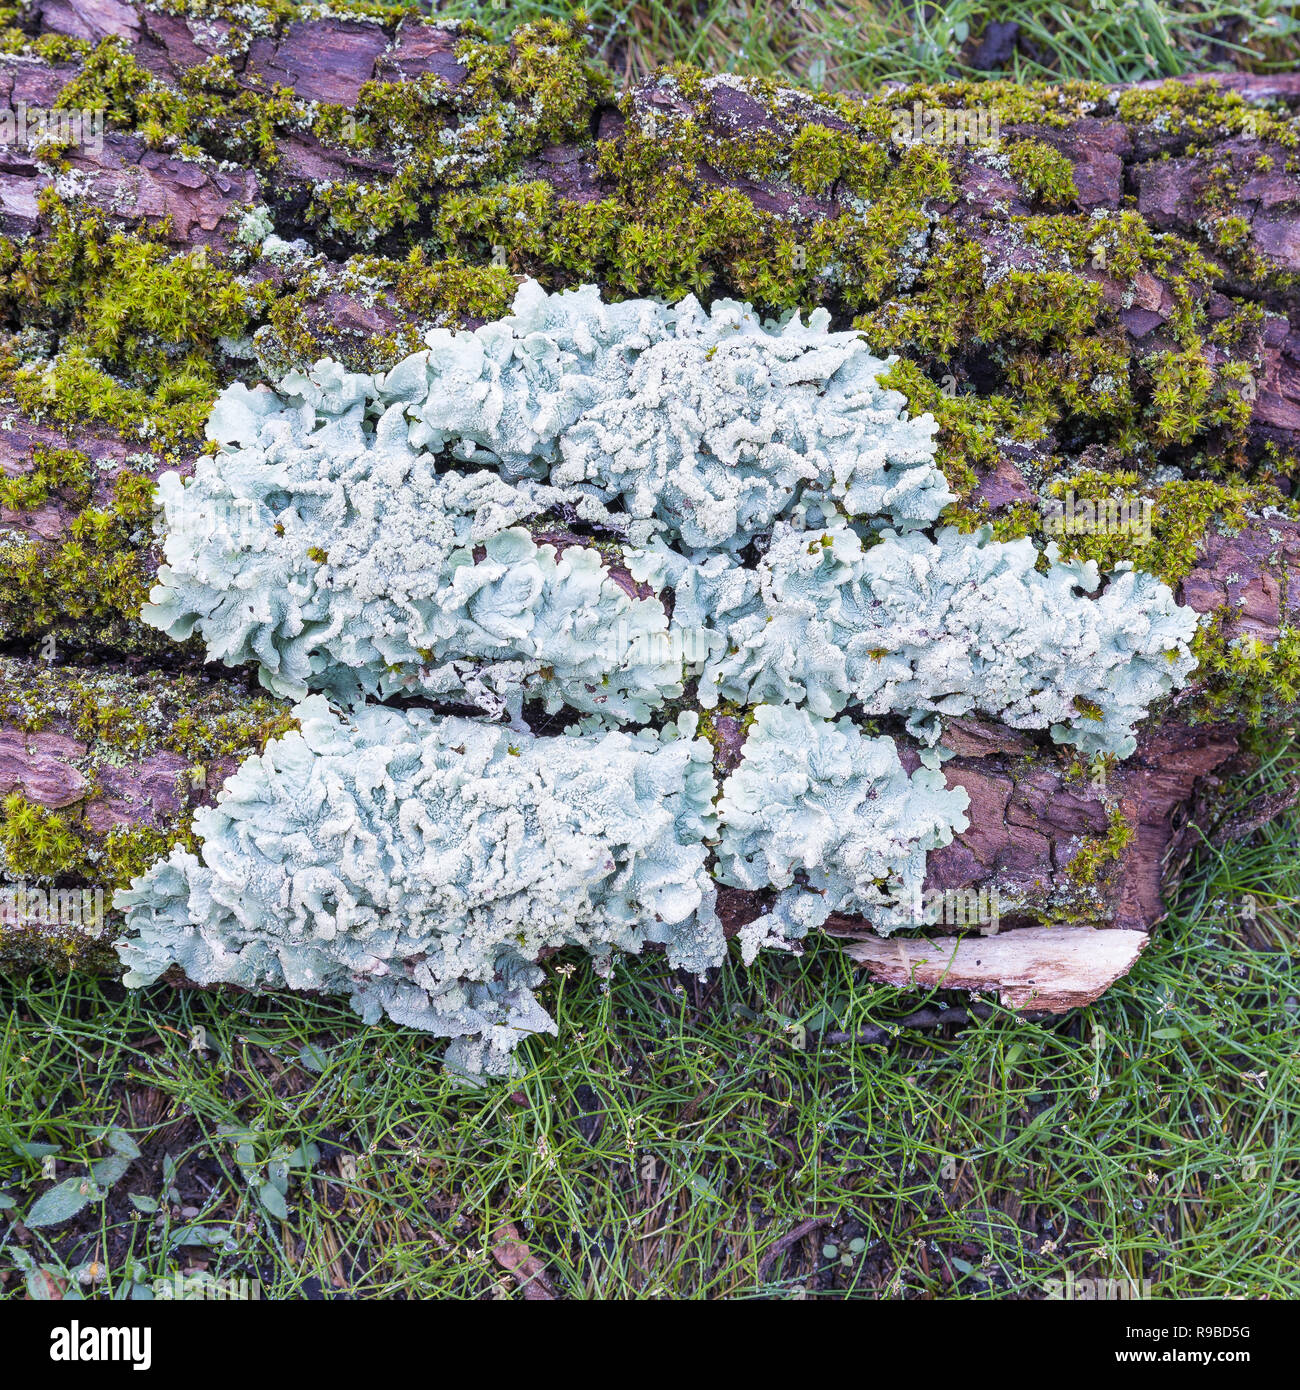 Foliose lichen, genus Parmelia on bark surrounded by moss. Concepts: moss and lichen difference, symbiosis, environmental indicator Stock Photo